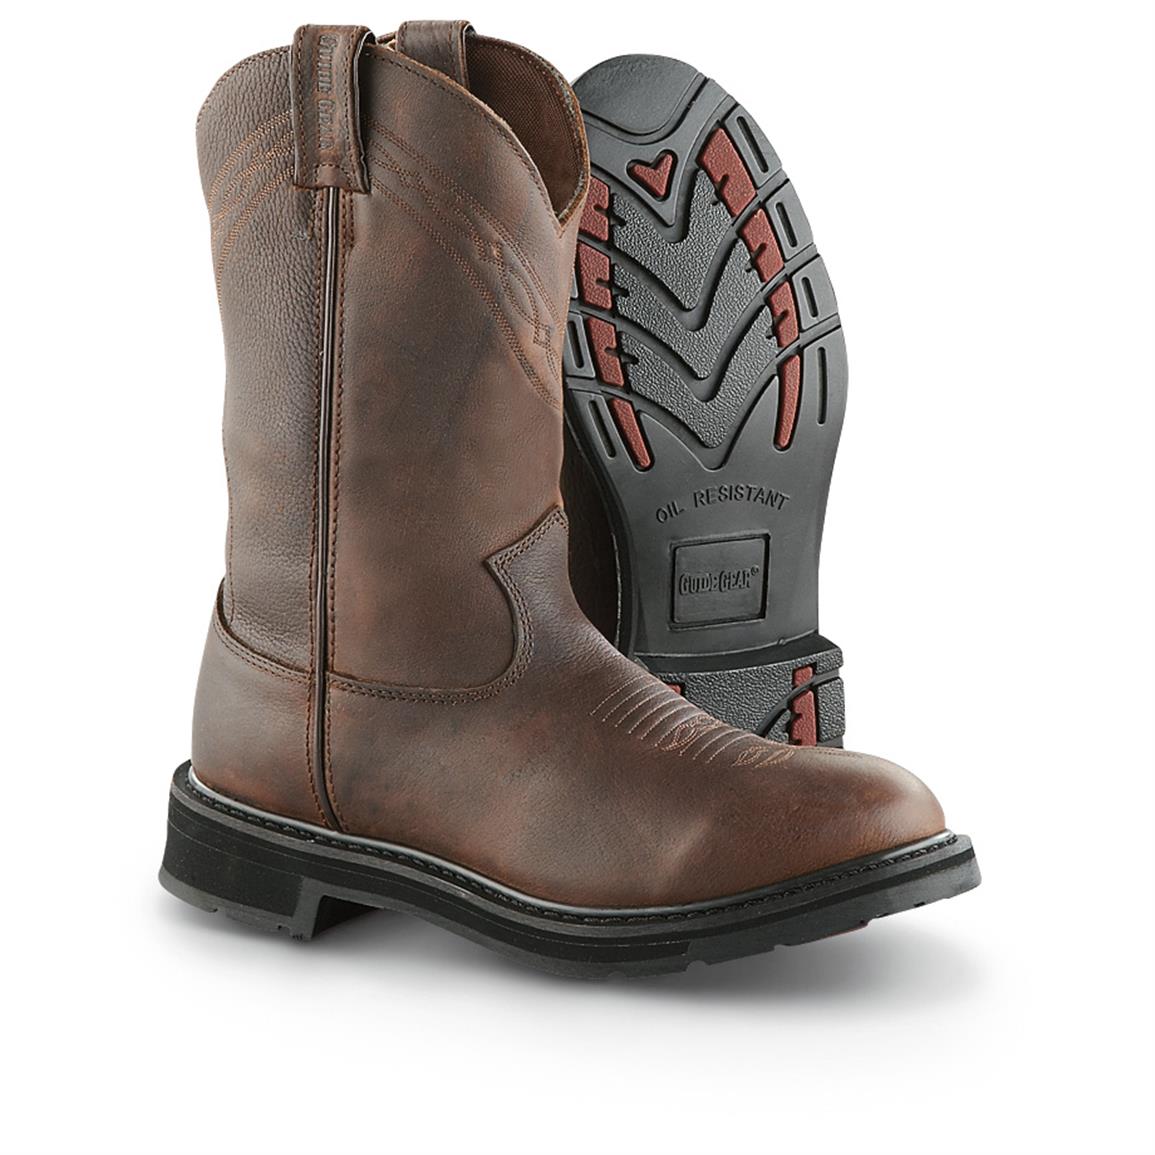 Guide Gear Men's 12" PullOn Leather Waterproof Work Boots 607621, Work Boots at Sportsman's Guide